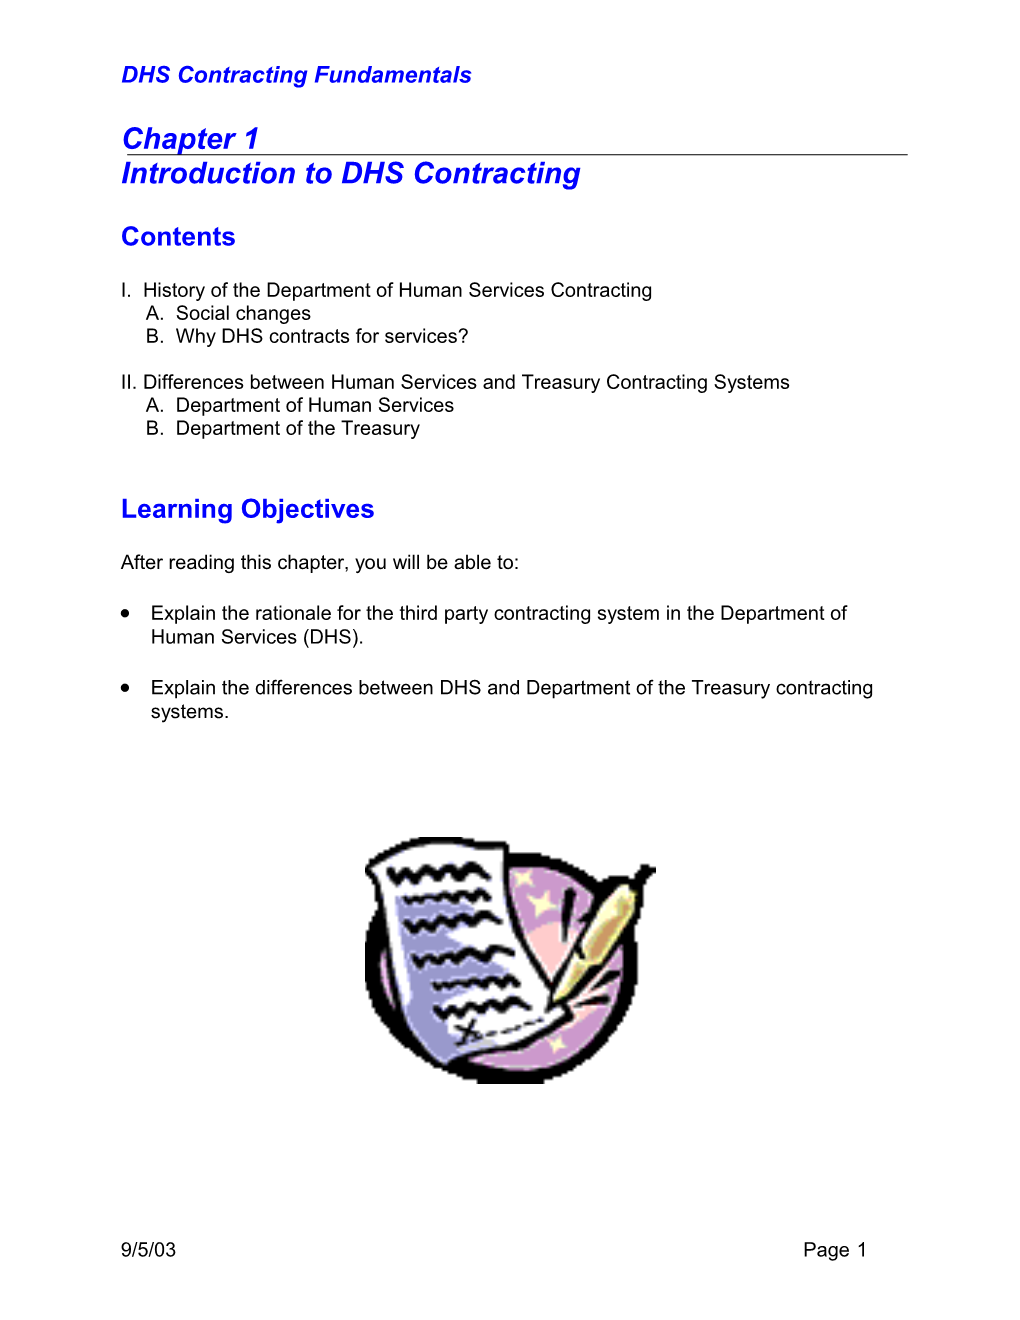 I. History of the Department of Human Services Contracting